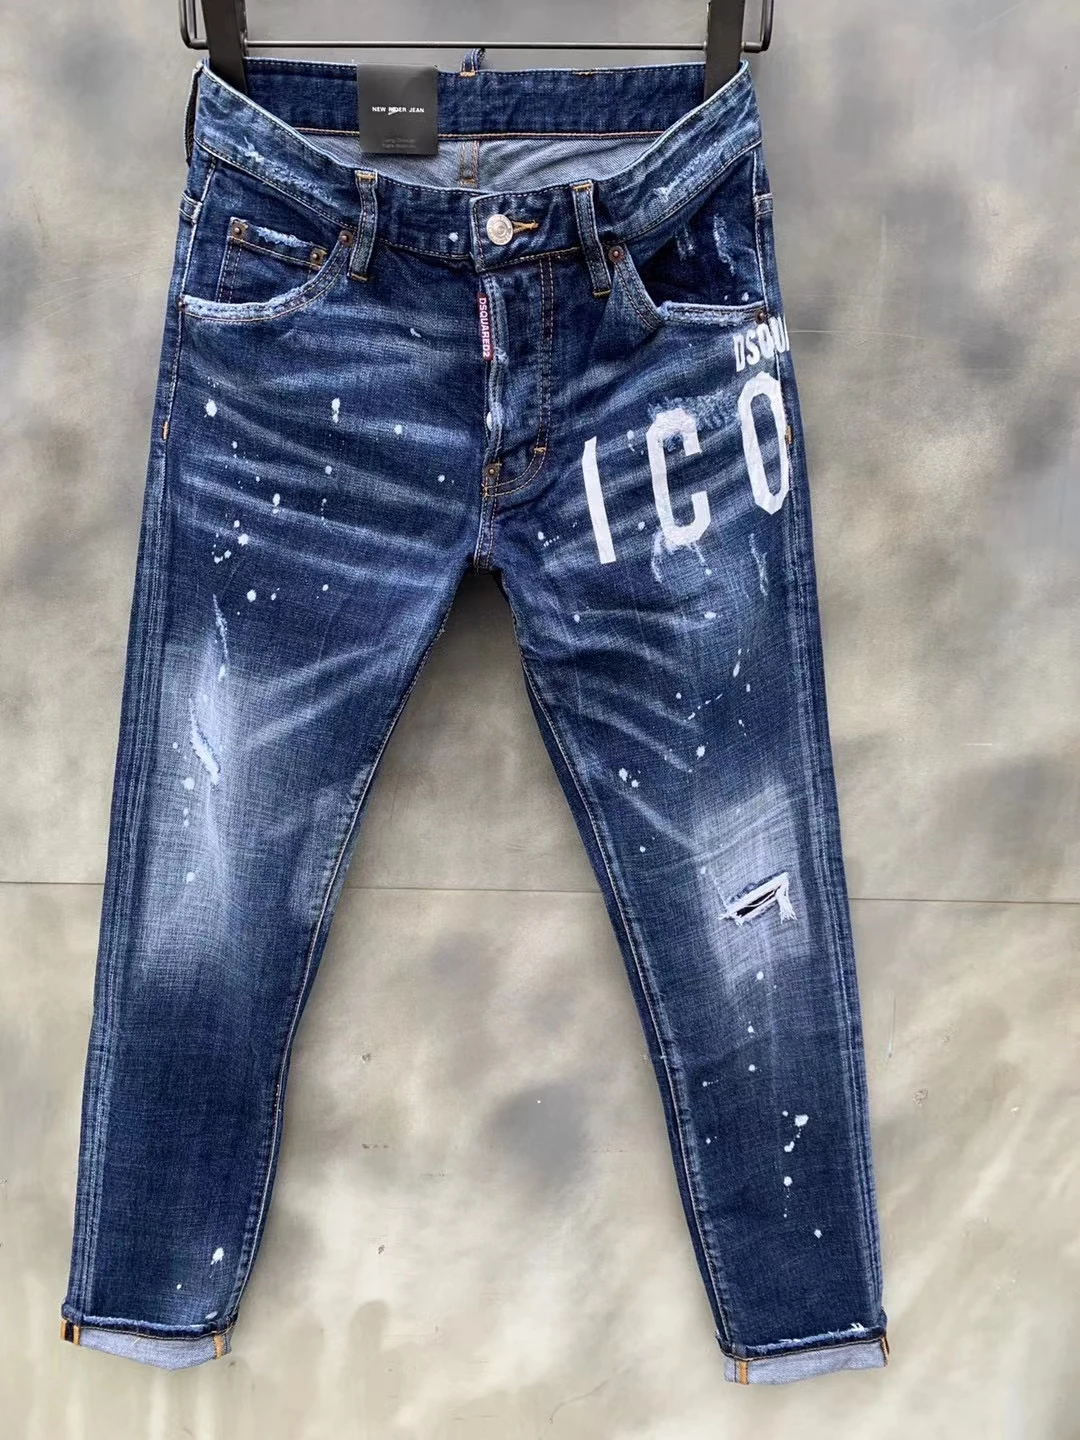 relaxed fit jeans 2021 Nnew Style Dsquared2 Fashion Motorcycle Ripped Paint Dot men's Jeans 020 mens stretch jeans